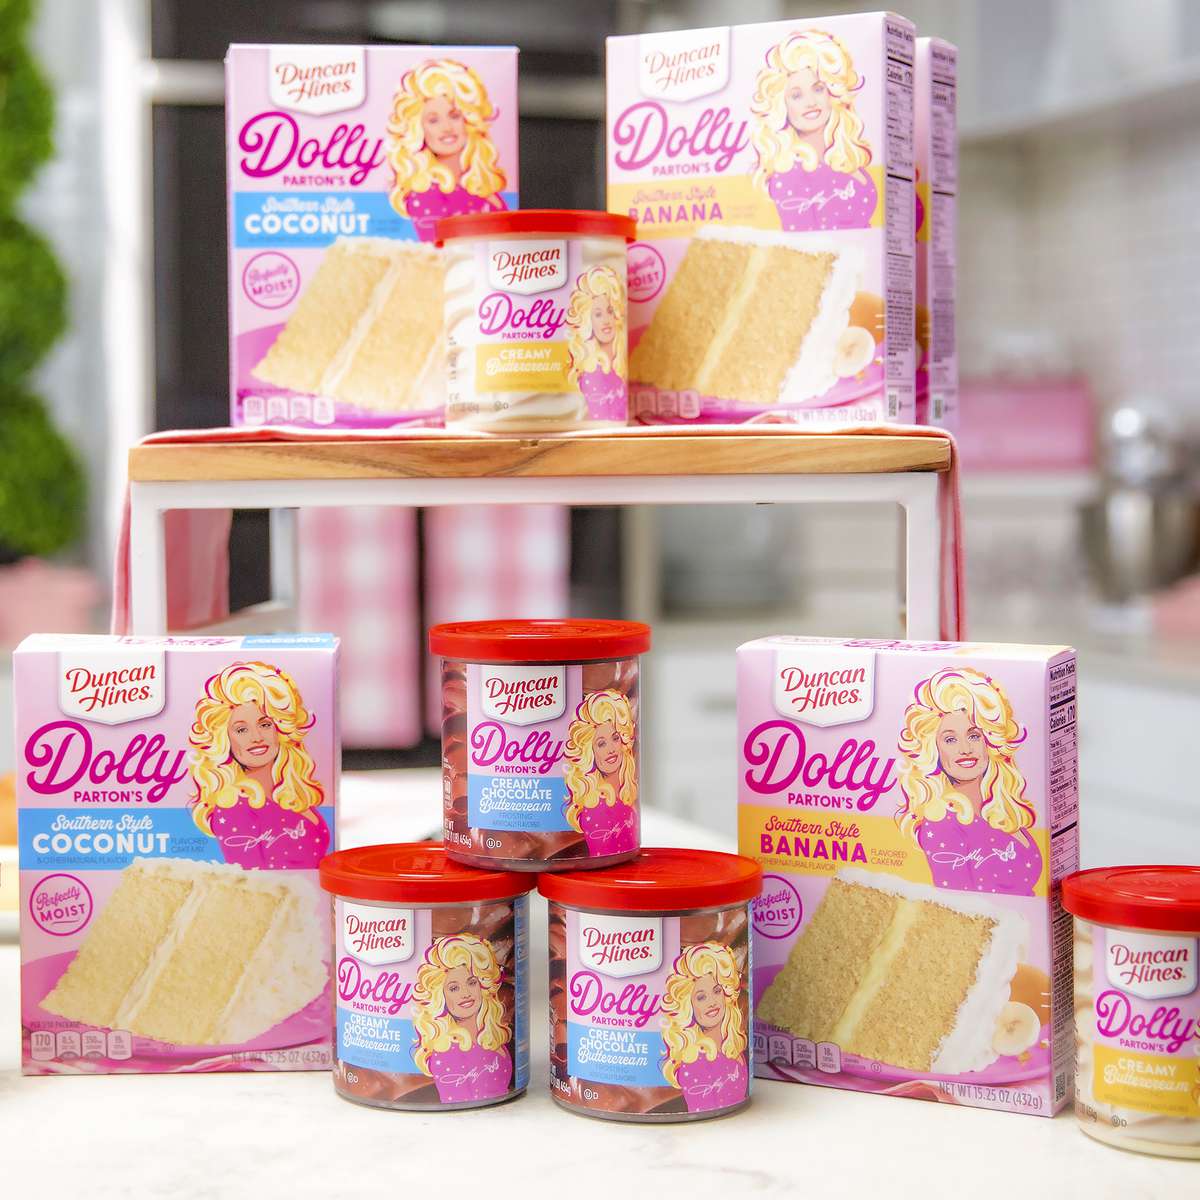 Products from the Dolly Parton x Duncan Hines collaboration